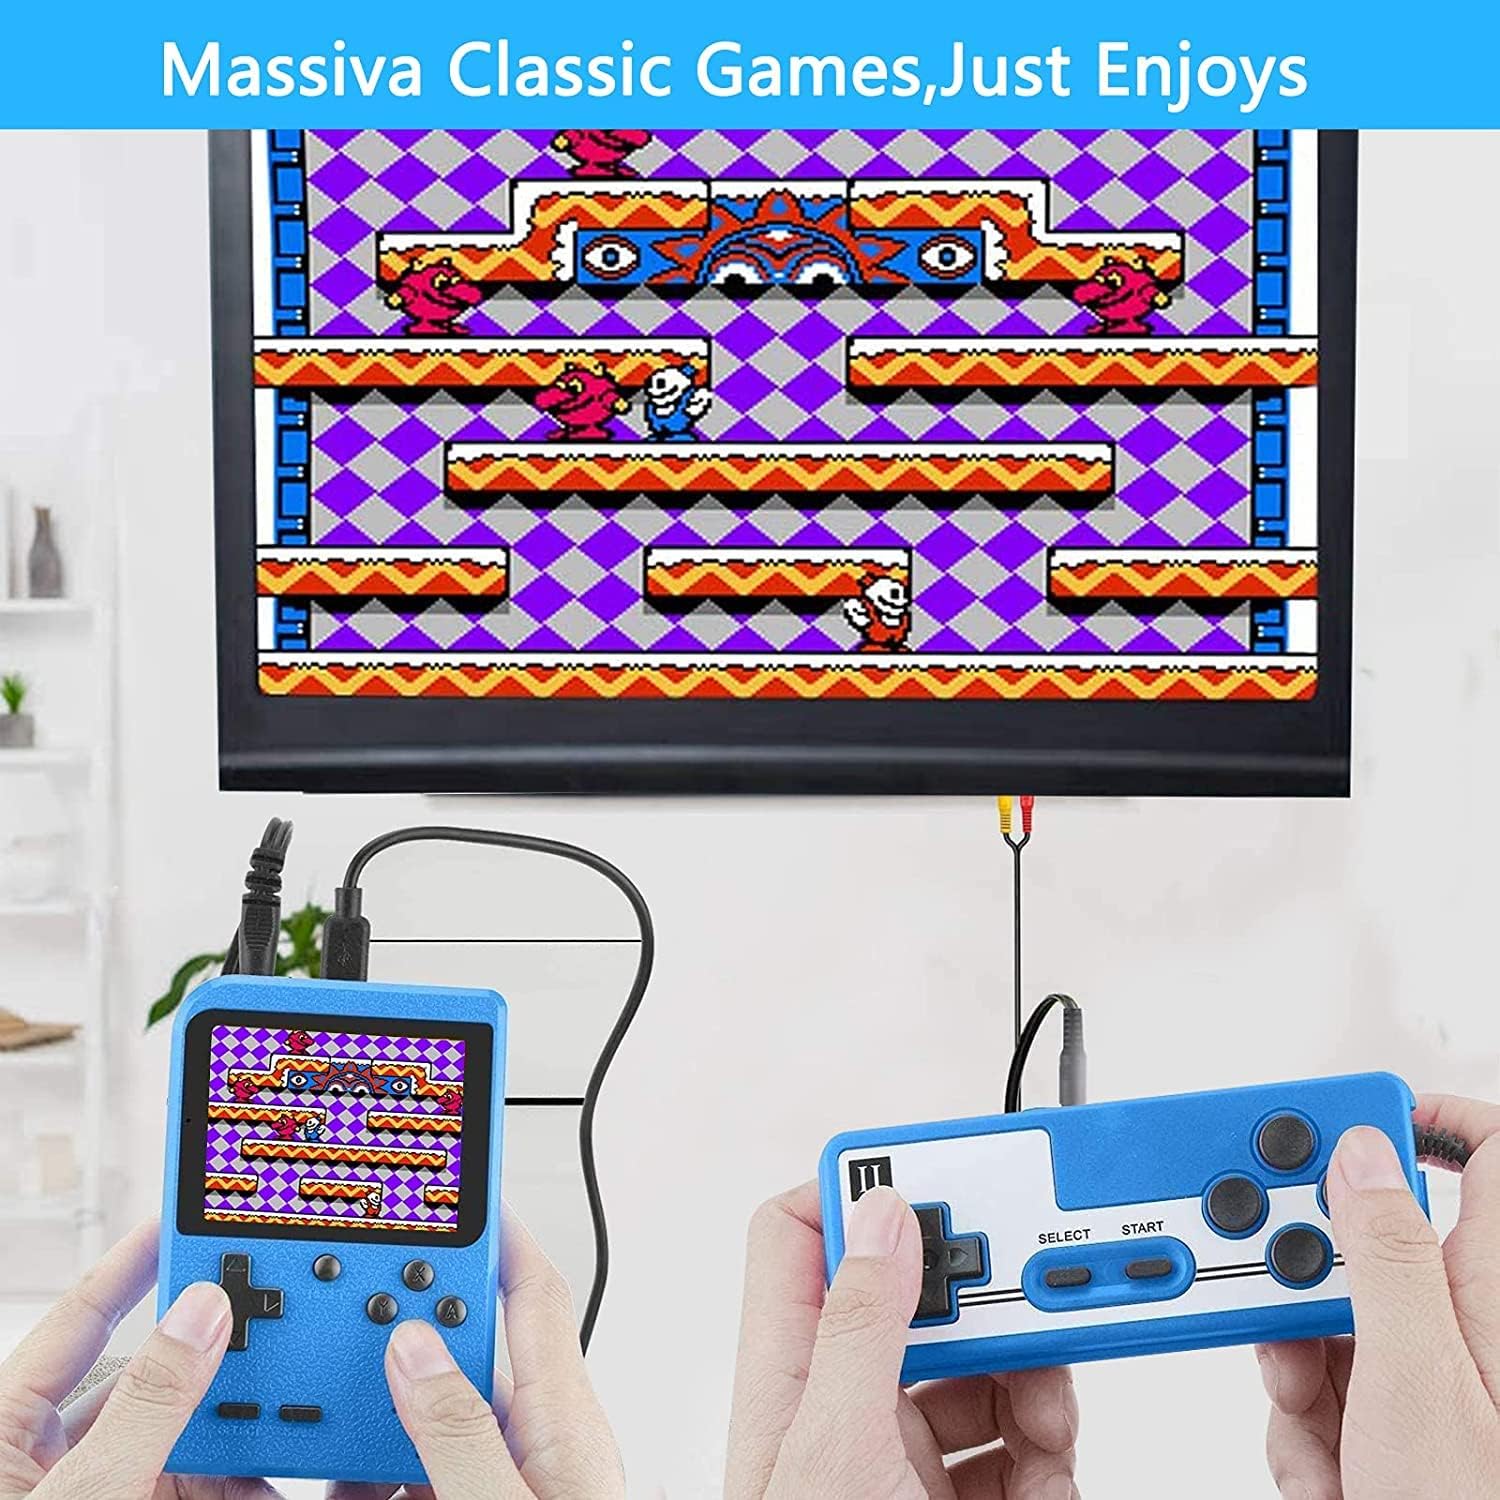 Tlsdosp Handheld Game Console, Portable Retro Video Game Console Upgrade 800 Classic FC Games, Large Battery Capacity of 1020mAh, USB Charging, Electronic Game Player Birthday Xmas Present Storage Bag